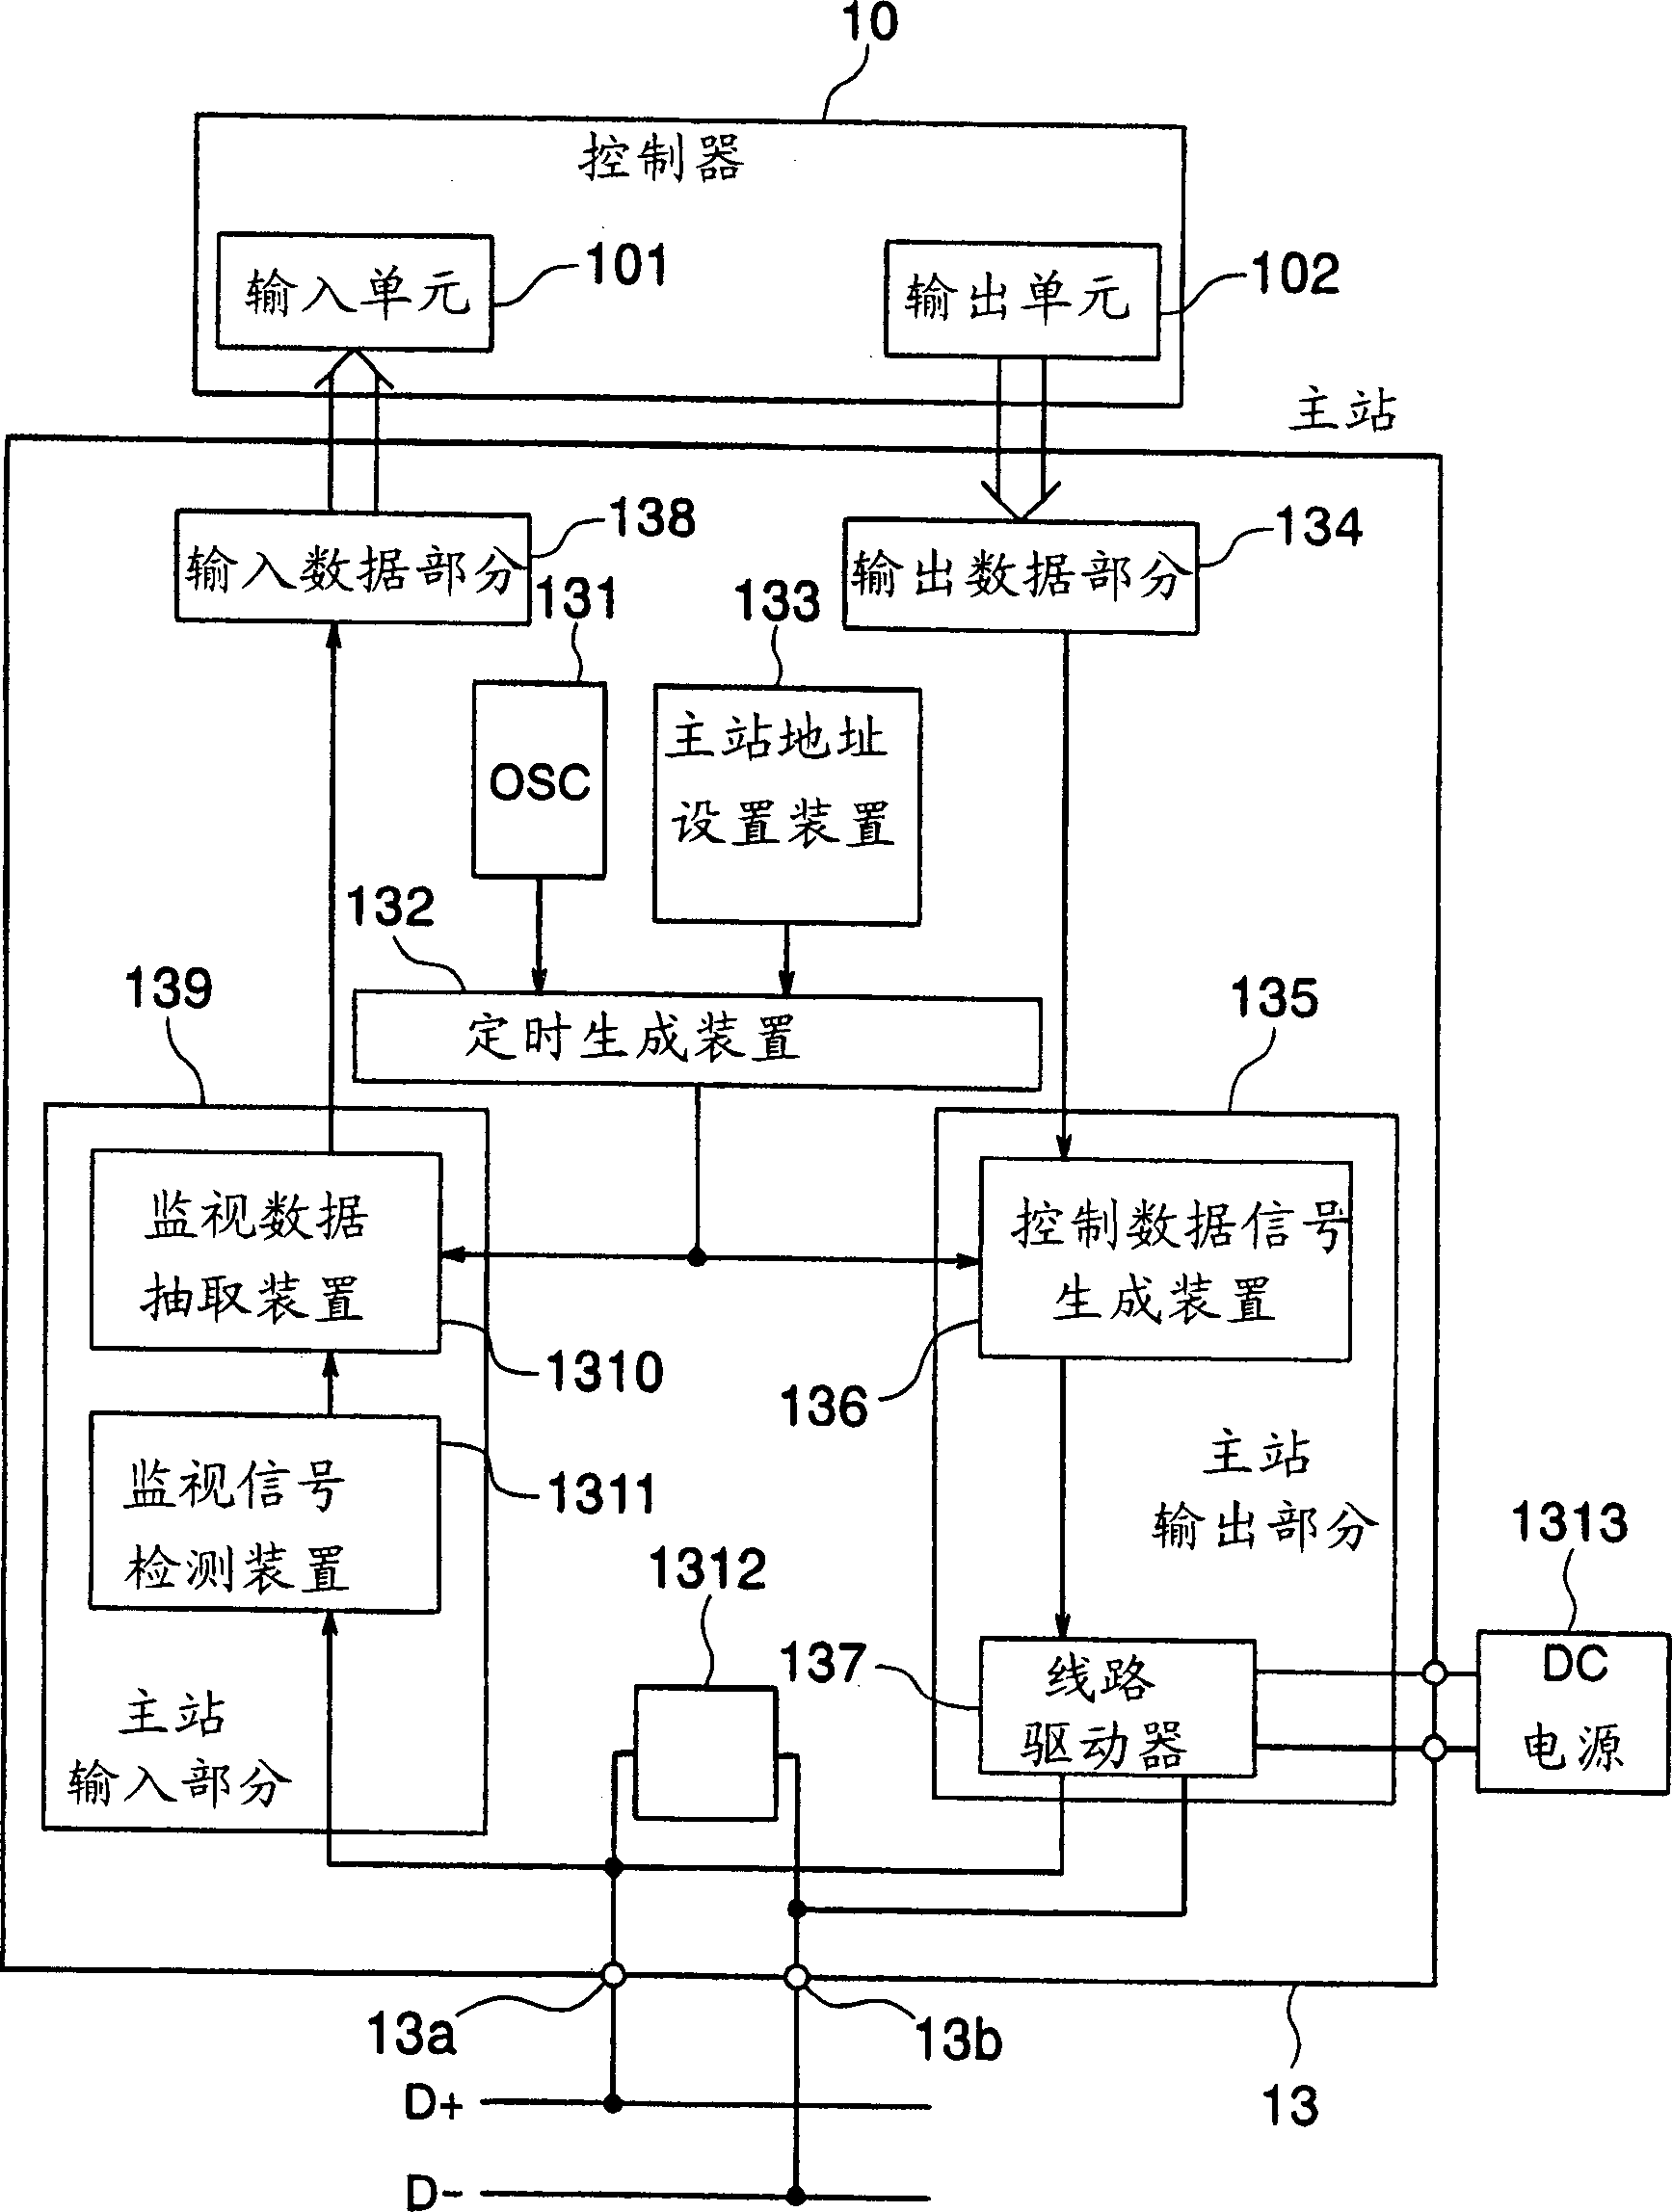 Control and monitoring signal transmission system